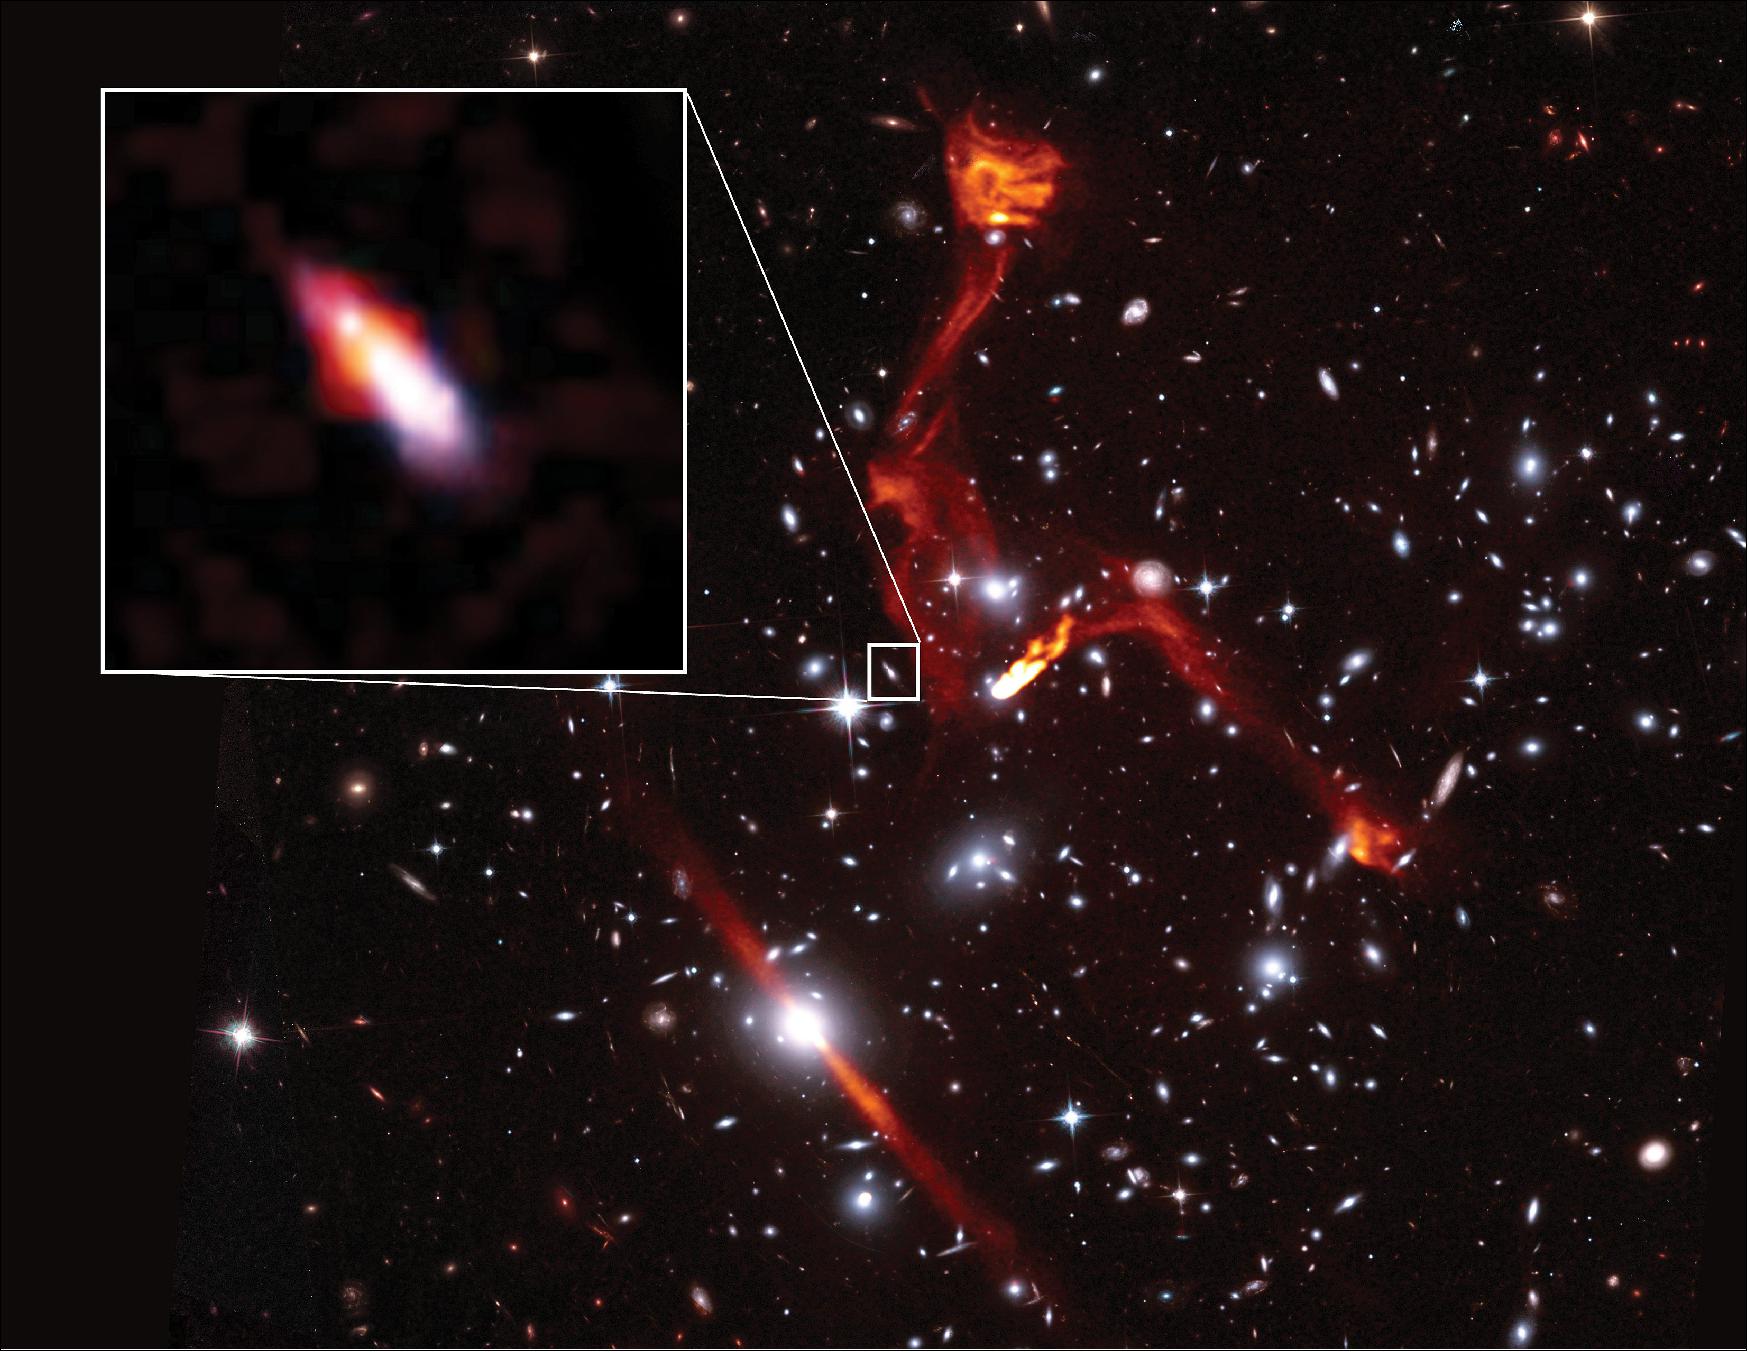 Figure 27: VLA radio image superimposed on a Hubble Space Telescope image of the galaxy cluster MACSJ0717.5+3745. Pullout shows distant galaxy VLAHFF-J071736.66+374506.4, far beyond the cluster, and likely the faintest radio-emitting object ever detected. The cluster is more than 5 billion light-years from Earth; the background galaxy more than 8 billion light-years distant (image credit: Heywood et al.; Sophia Dagnello, NRAO/AUI/NSF; STScI)